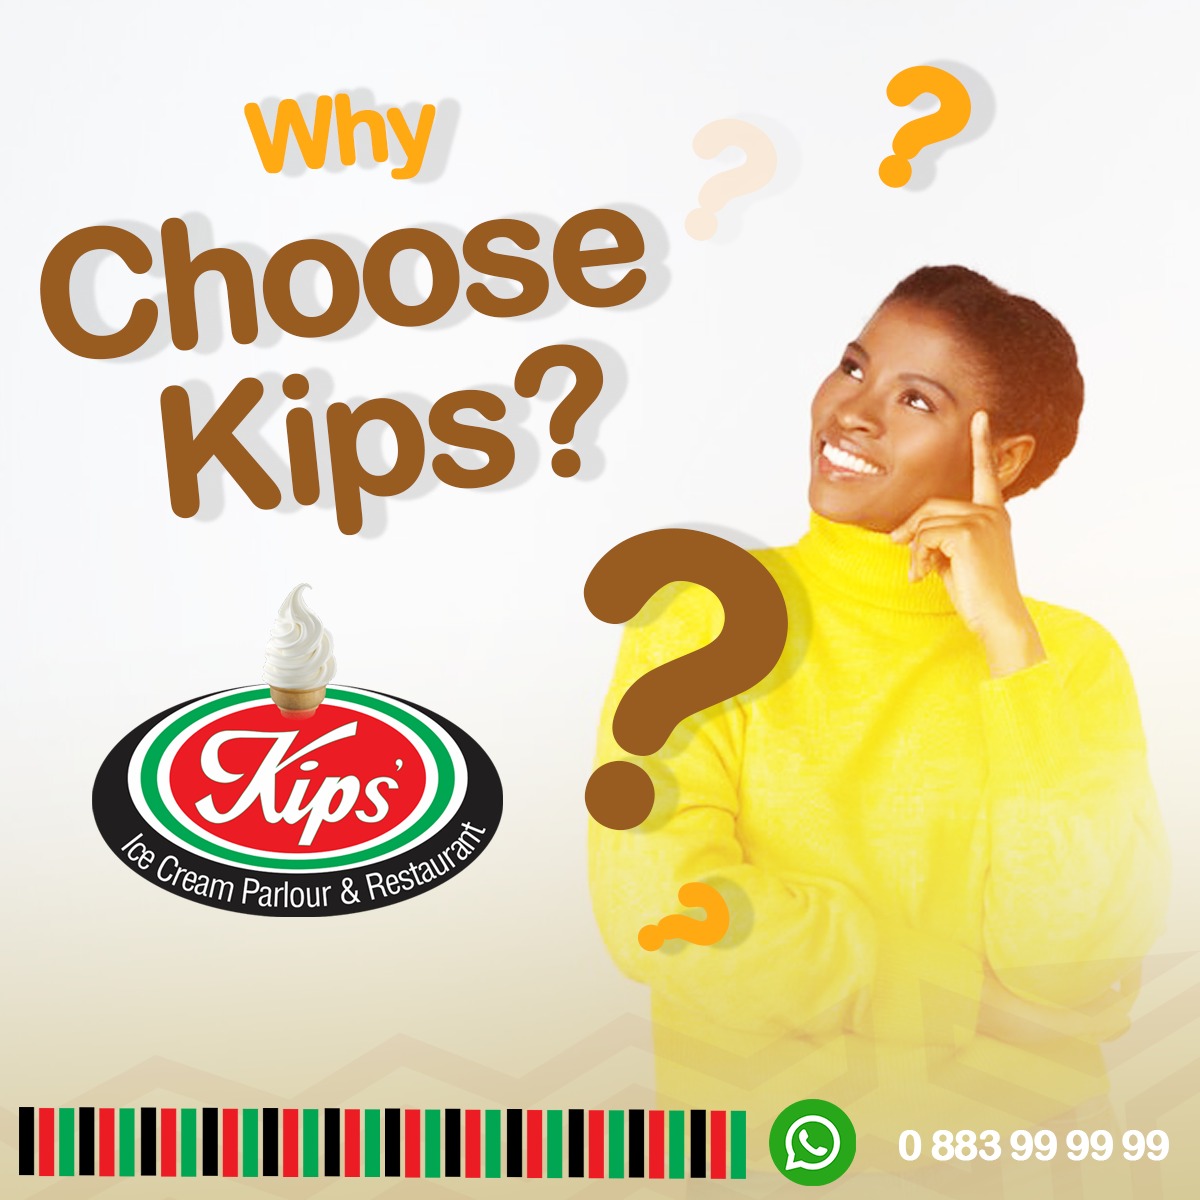 Why choose Kips?
Because we prioritize ...